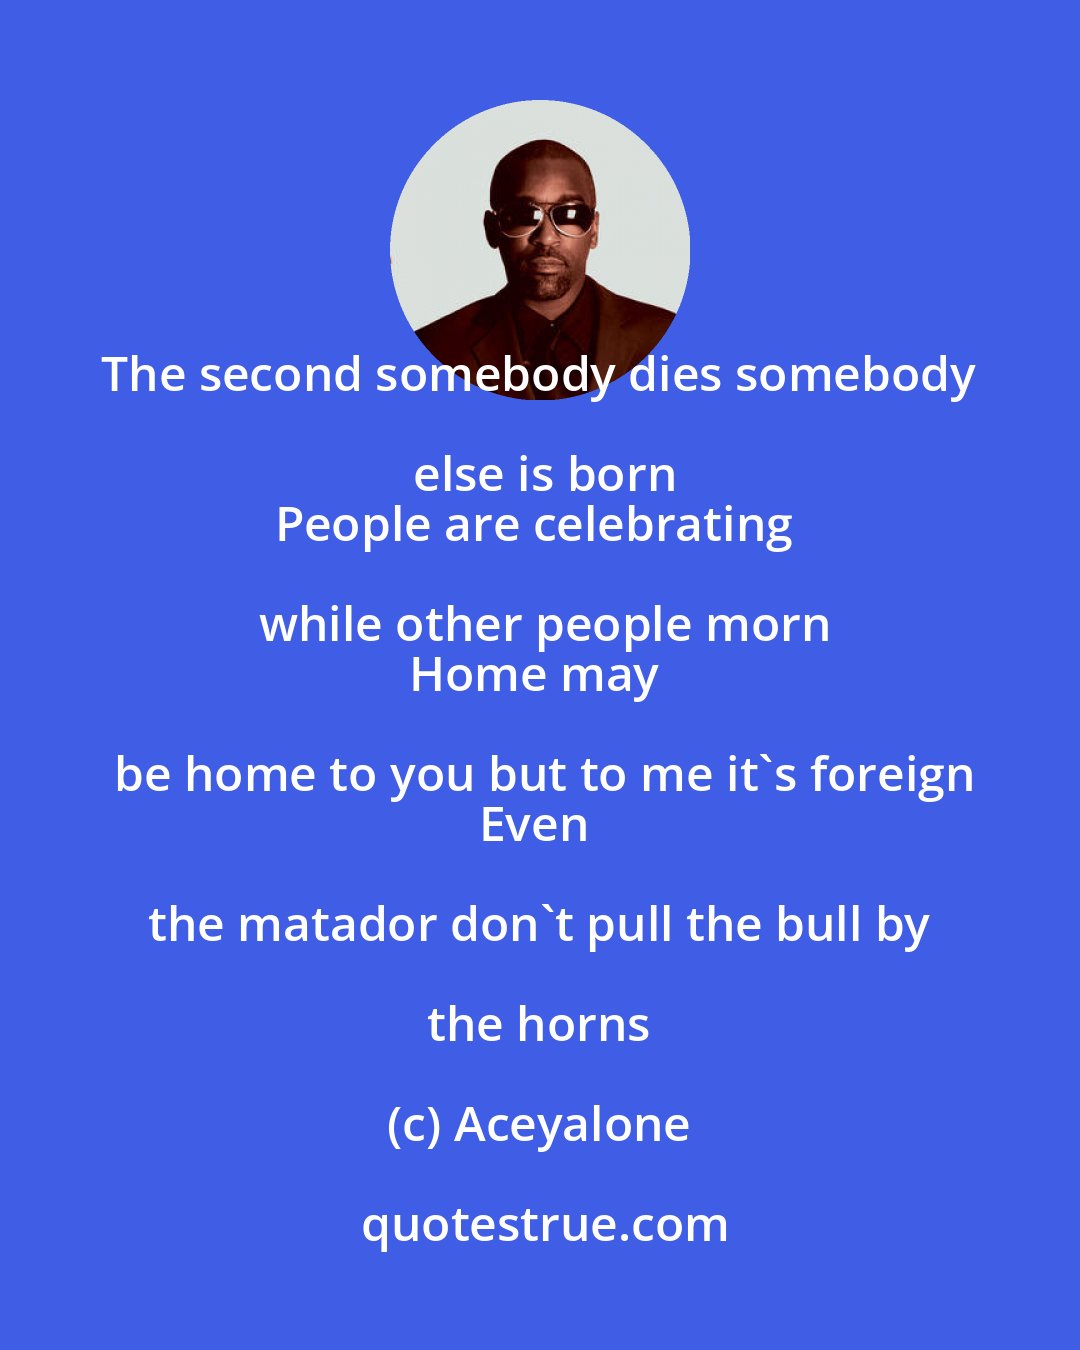 Aceyalone: The second somebody dies somebody else is born
People are celebrating while other people morn
Home may be home to you but to me it's foreign
Even the matador don't pull the bull by the horns